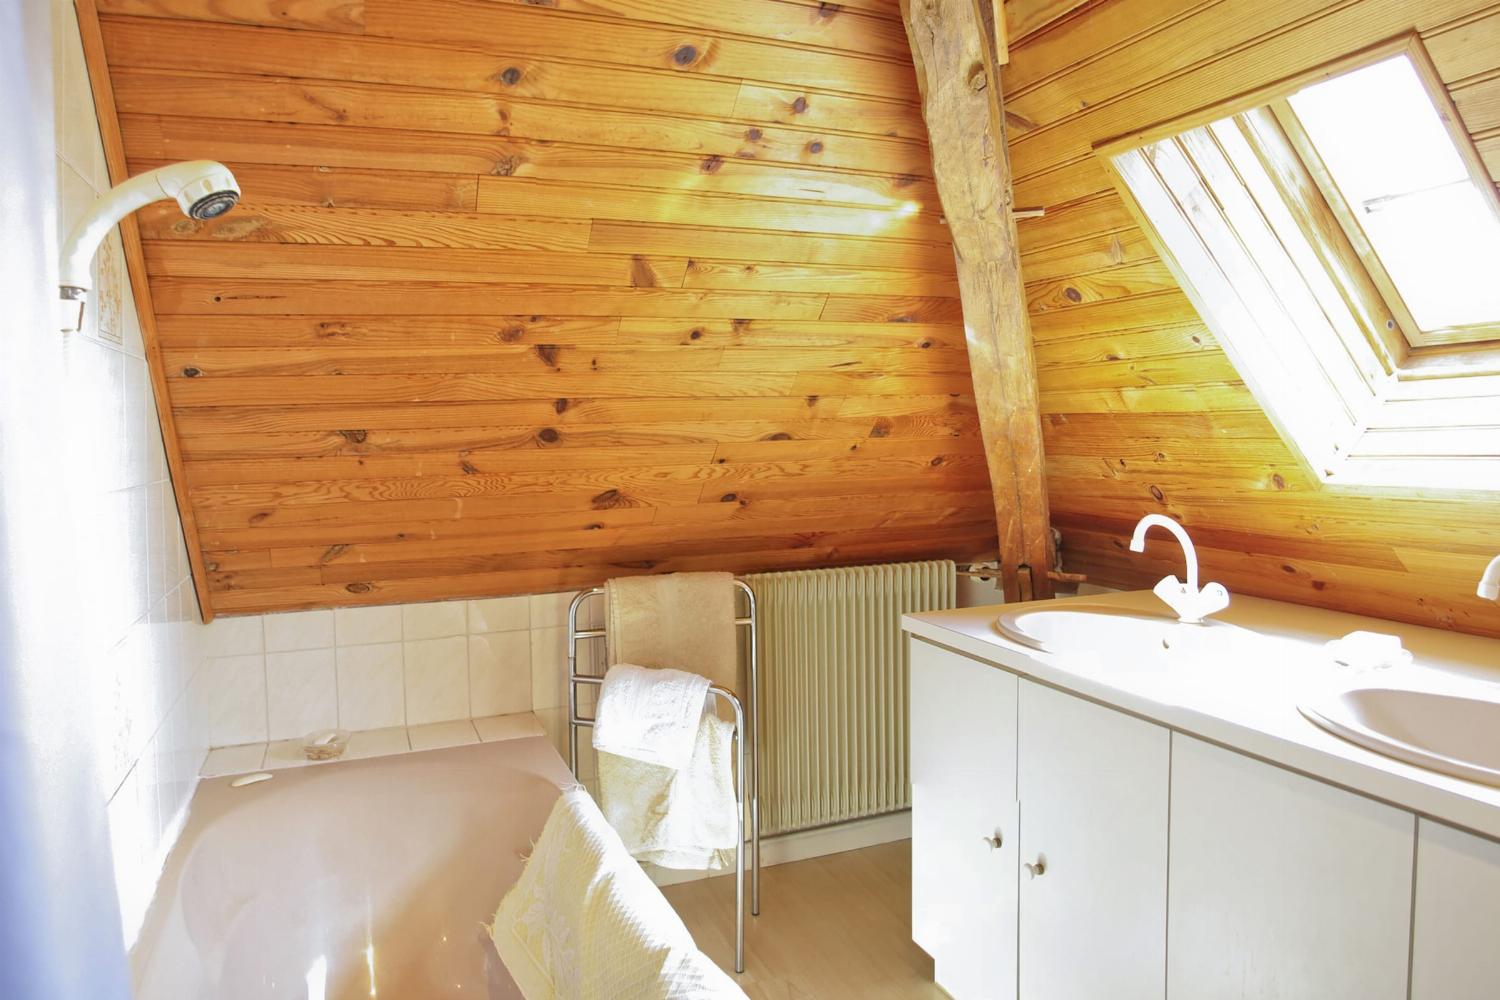 Bathroom | Holiday home in the Loire Valley